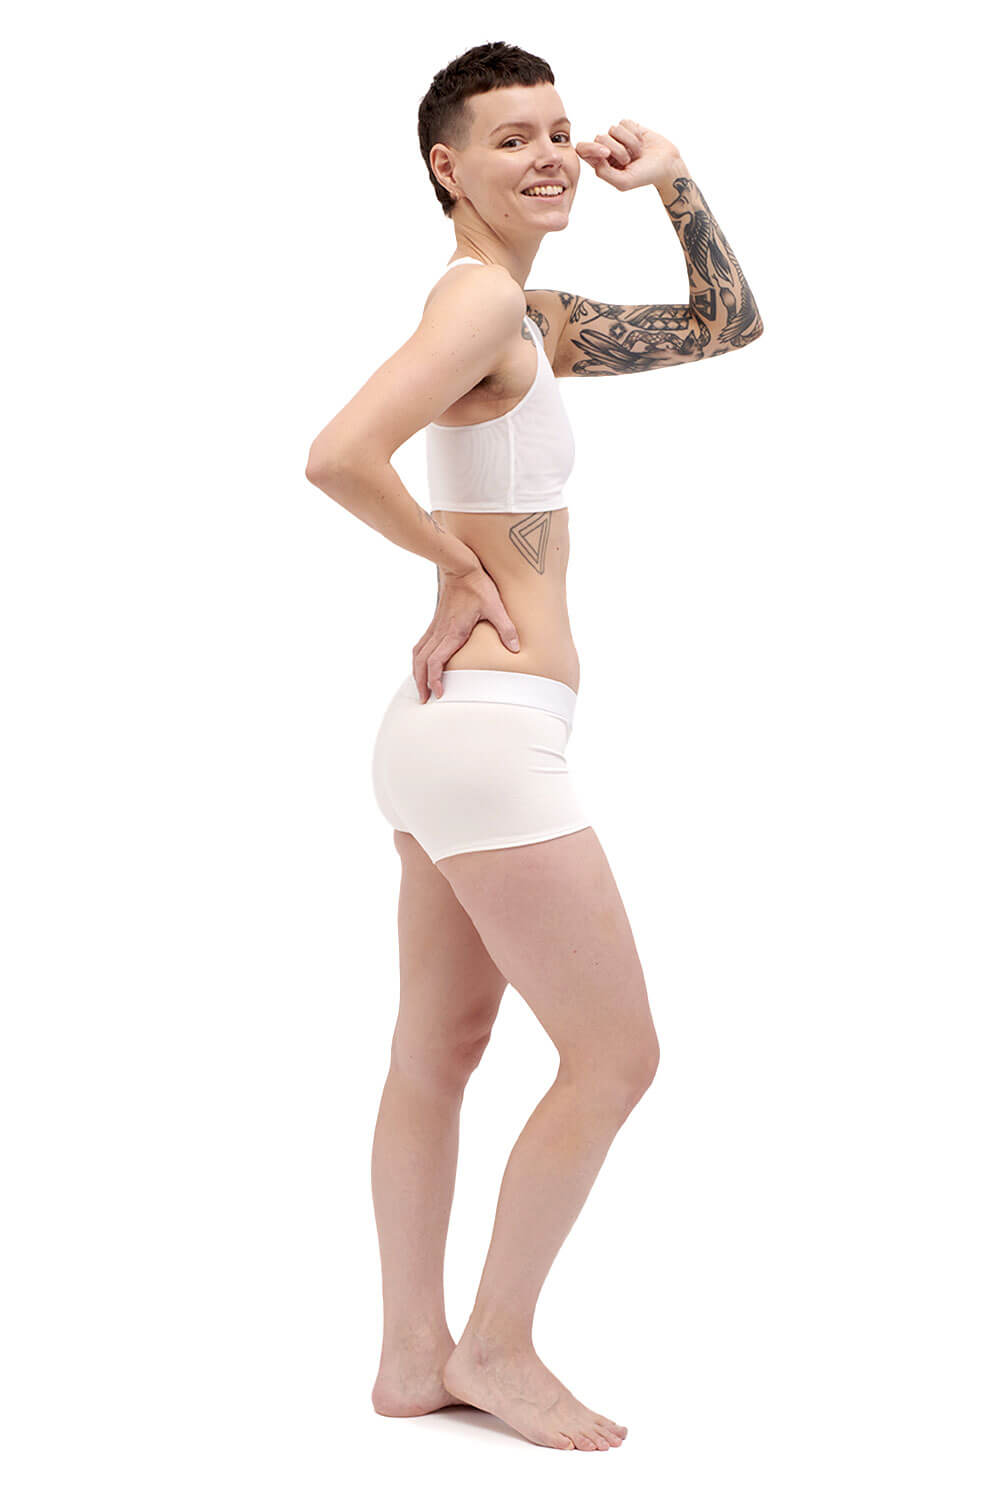 Petite person wearing a white racerback side-open chest binder made from breathable mesh, photographed from the left side.